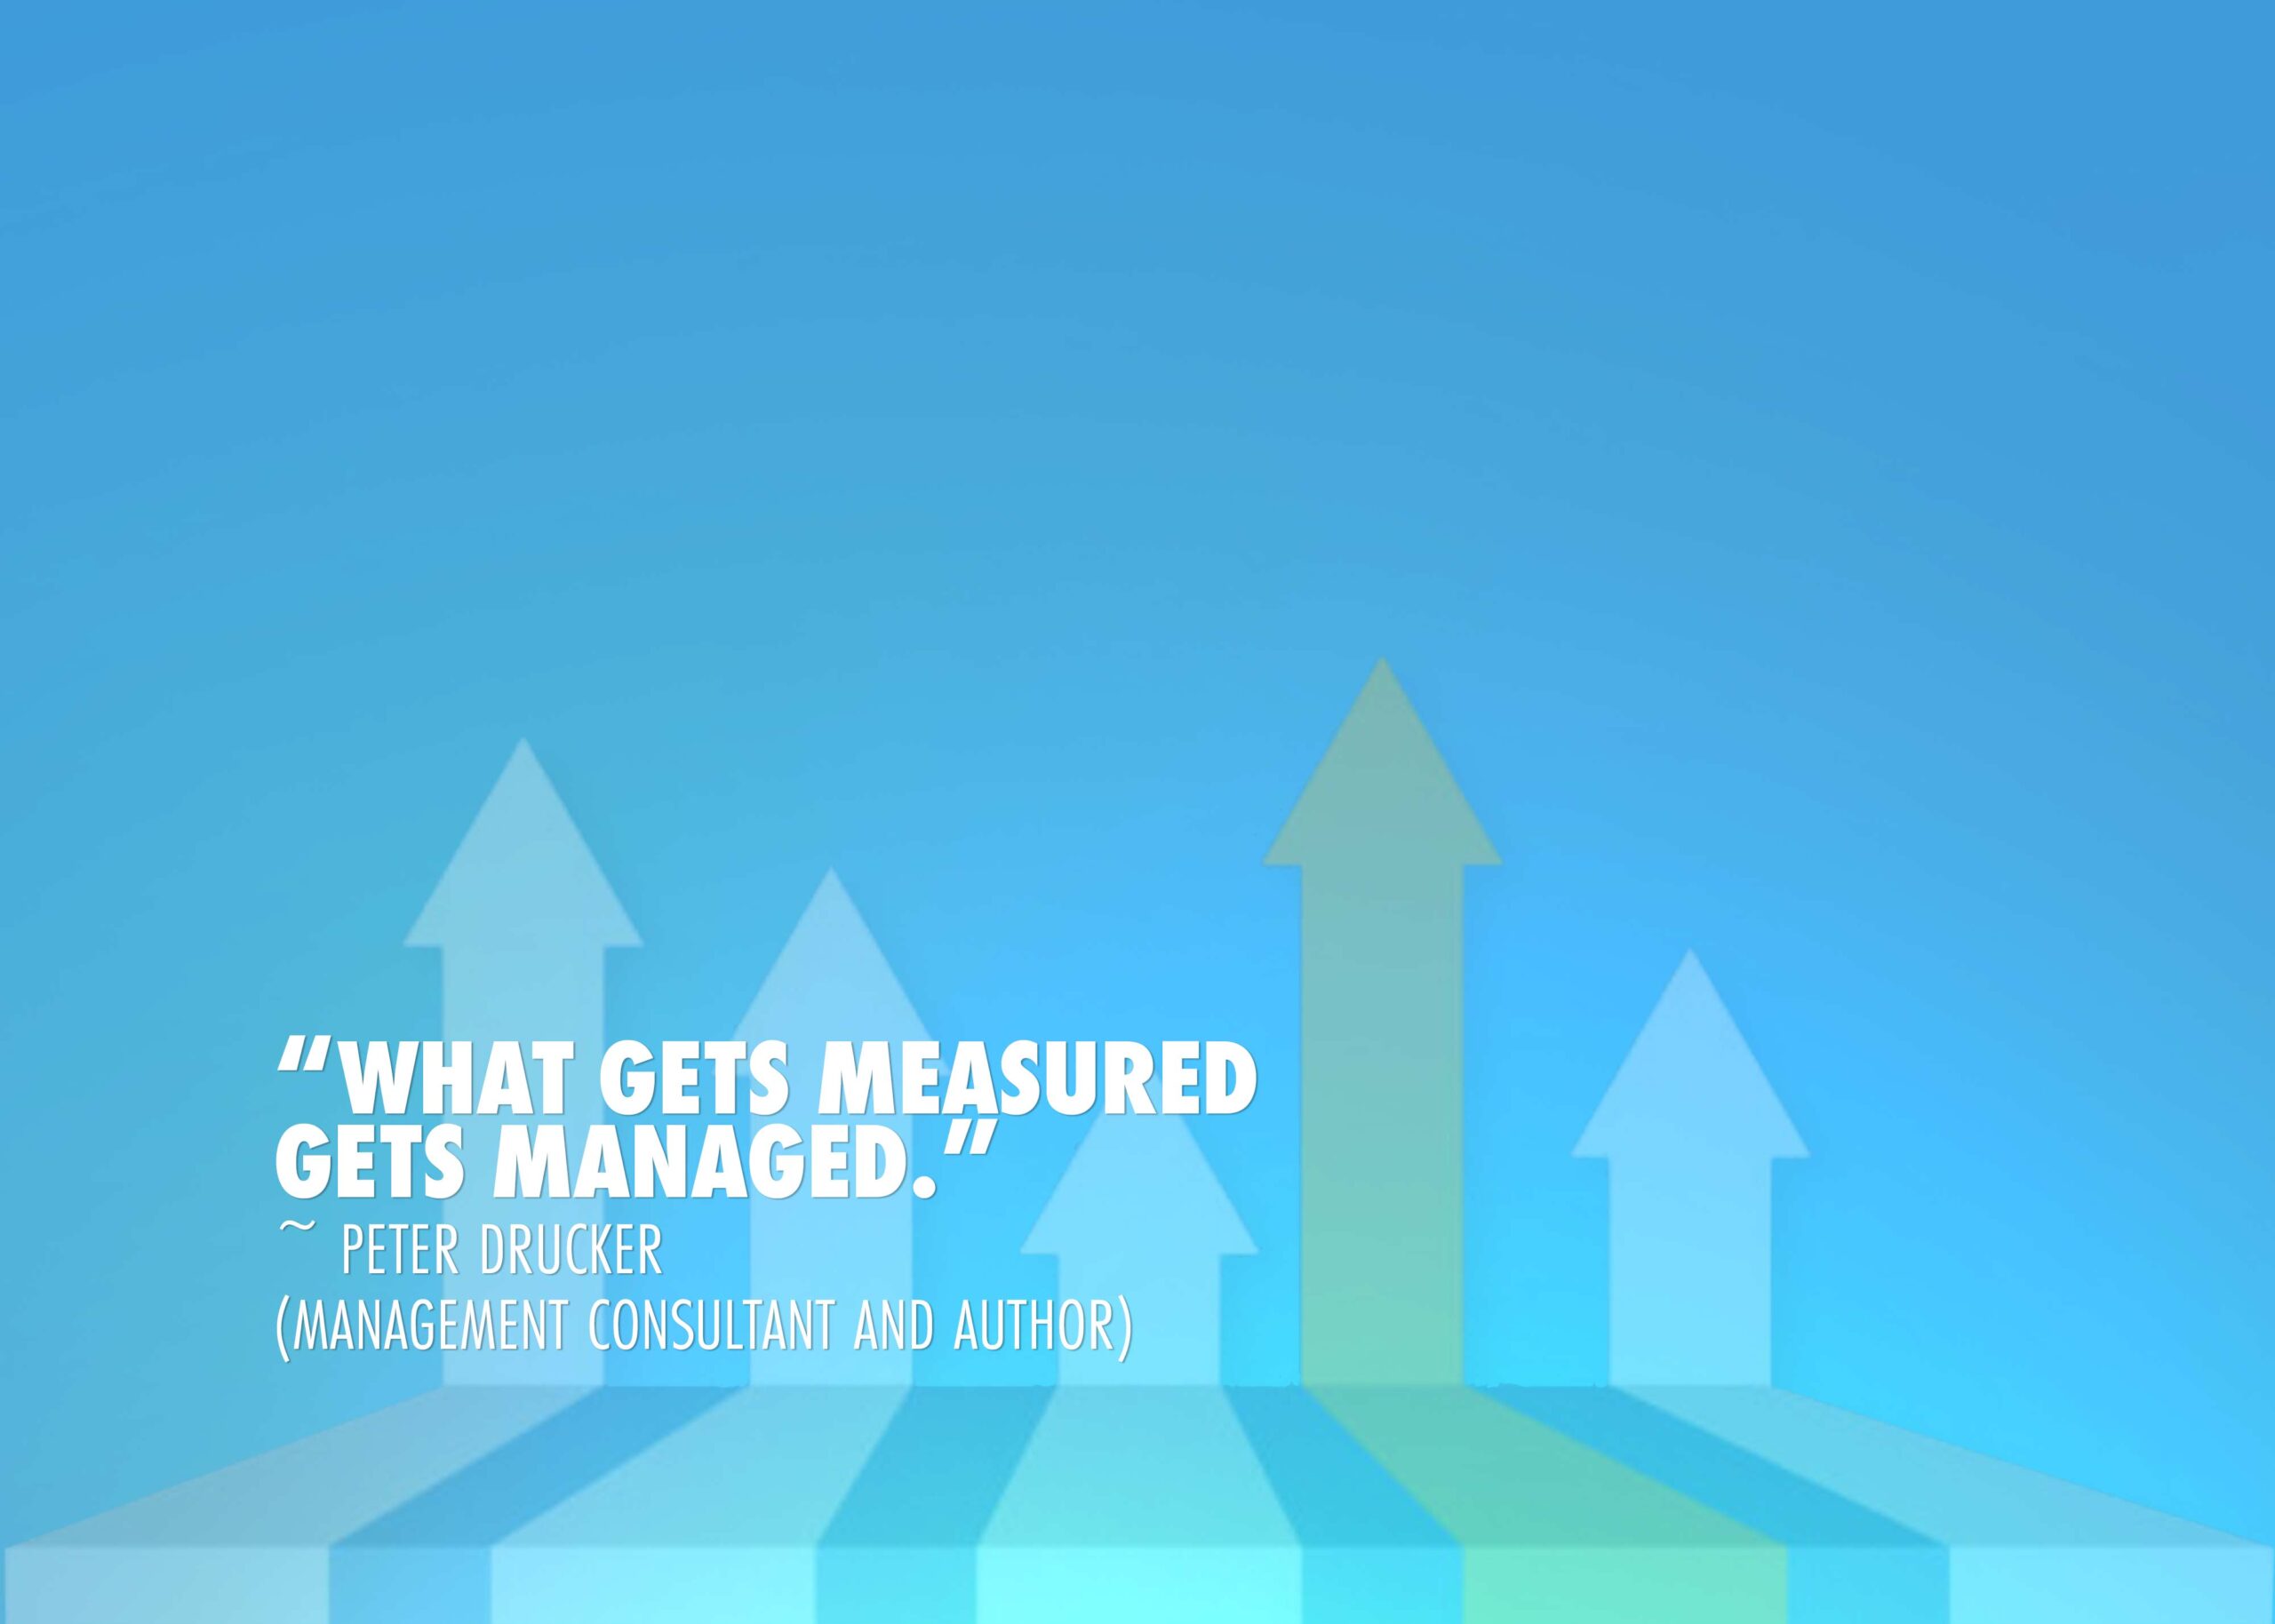 What gets measured gets managed